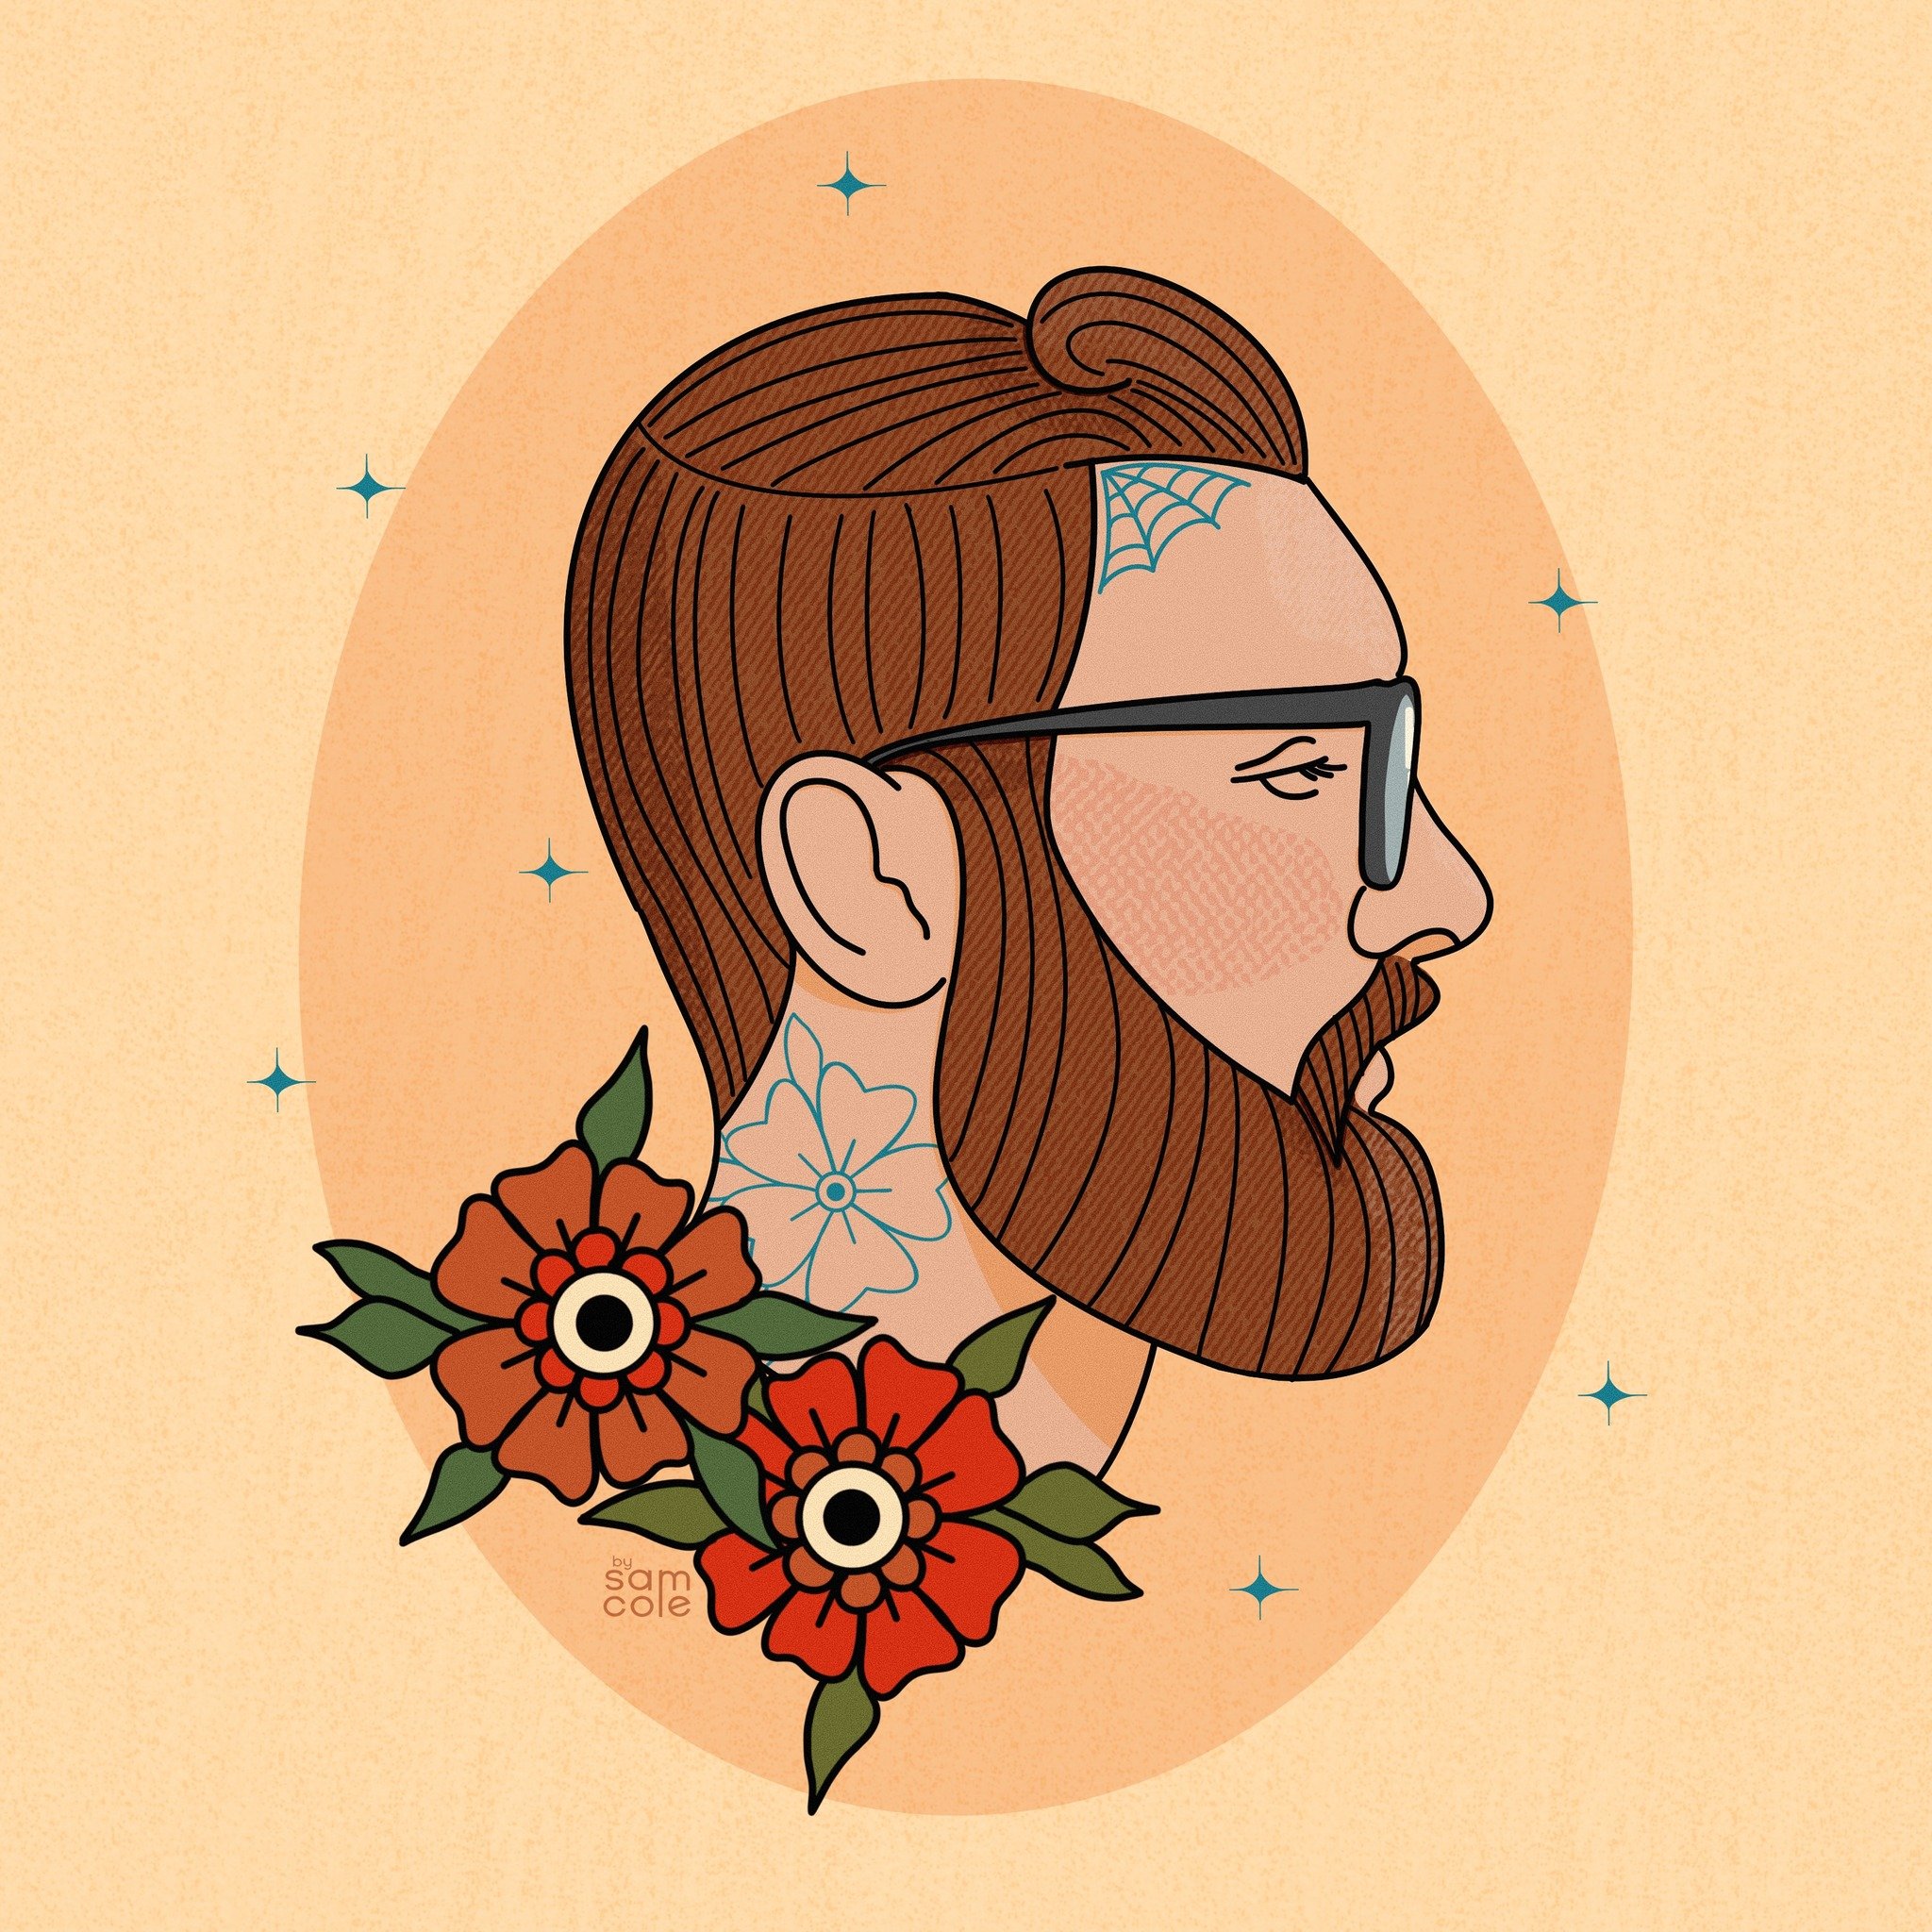 American traditional tattoo portrait of my partner! Obsessed with how this one came out! Think it would be so fun to some more! 

#illustrationart #colorpalette #illustration #illustrator
#artlicensing #surfacepattern #artist #creativeart
#procreatea